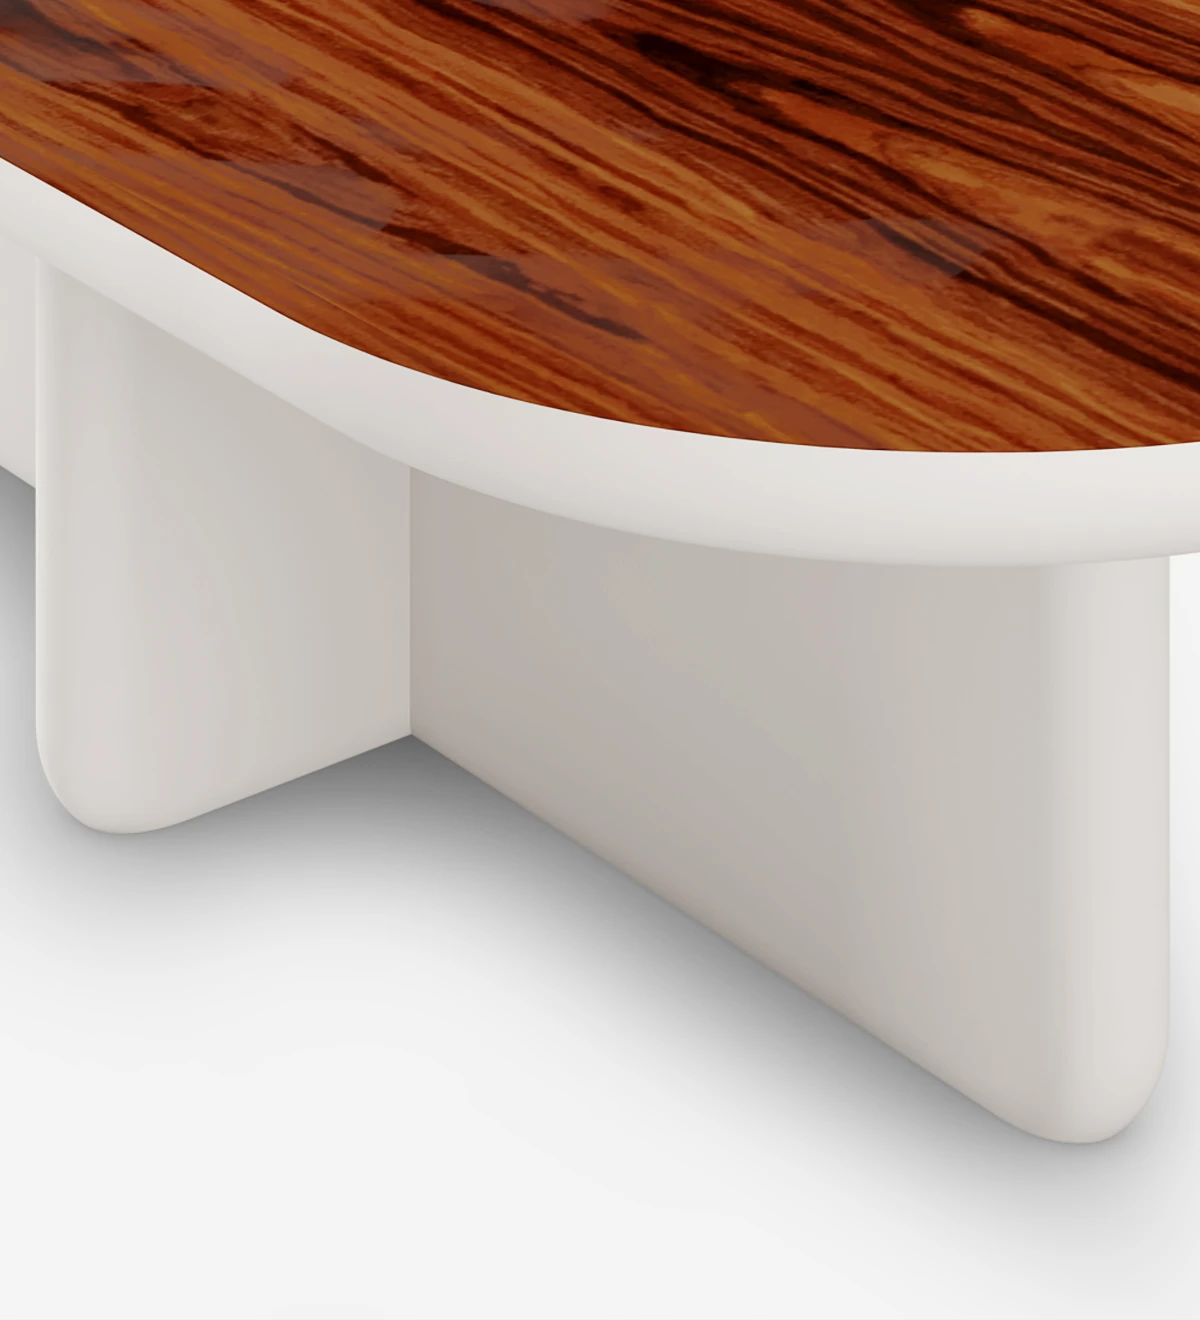 Rectangular center table with foot in pearl lacquer and top in selected high-gloss walnut.